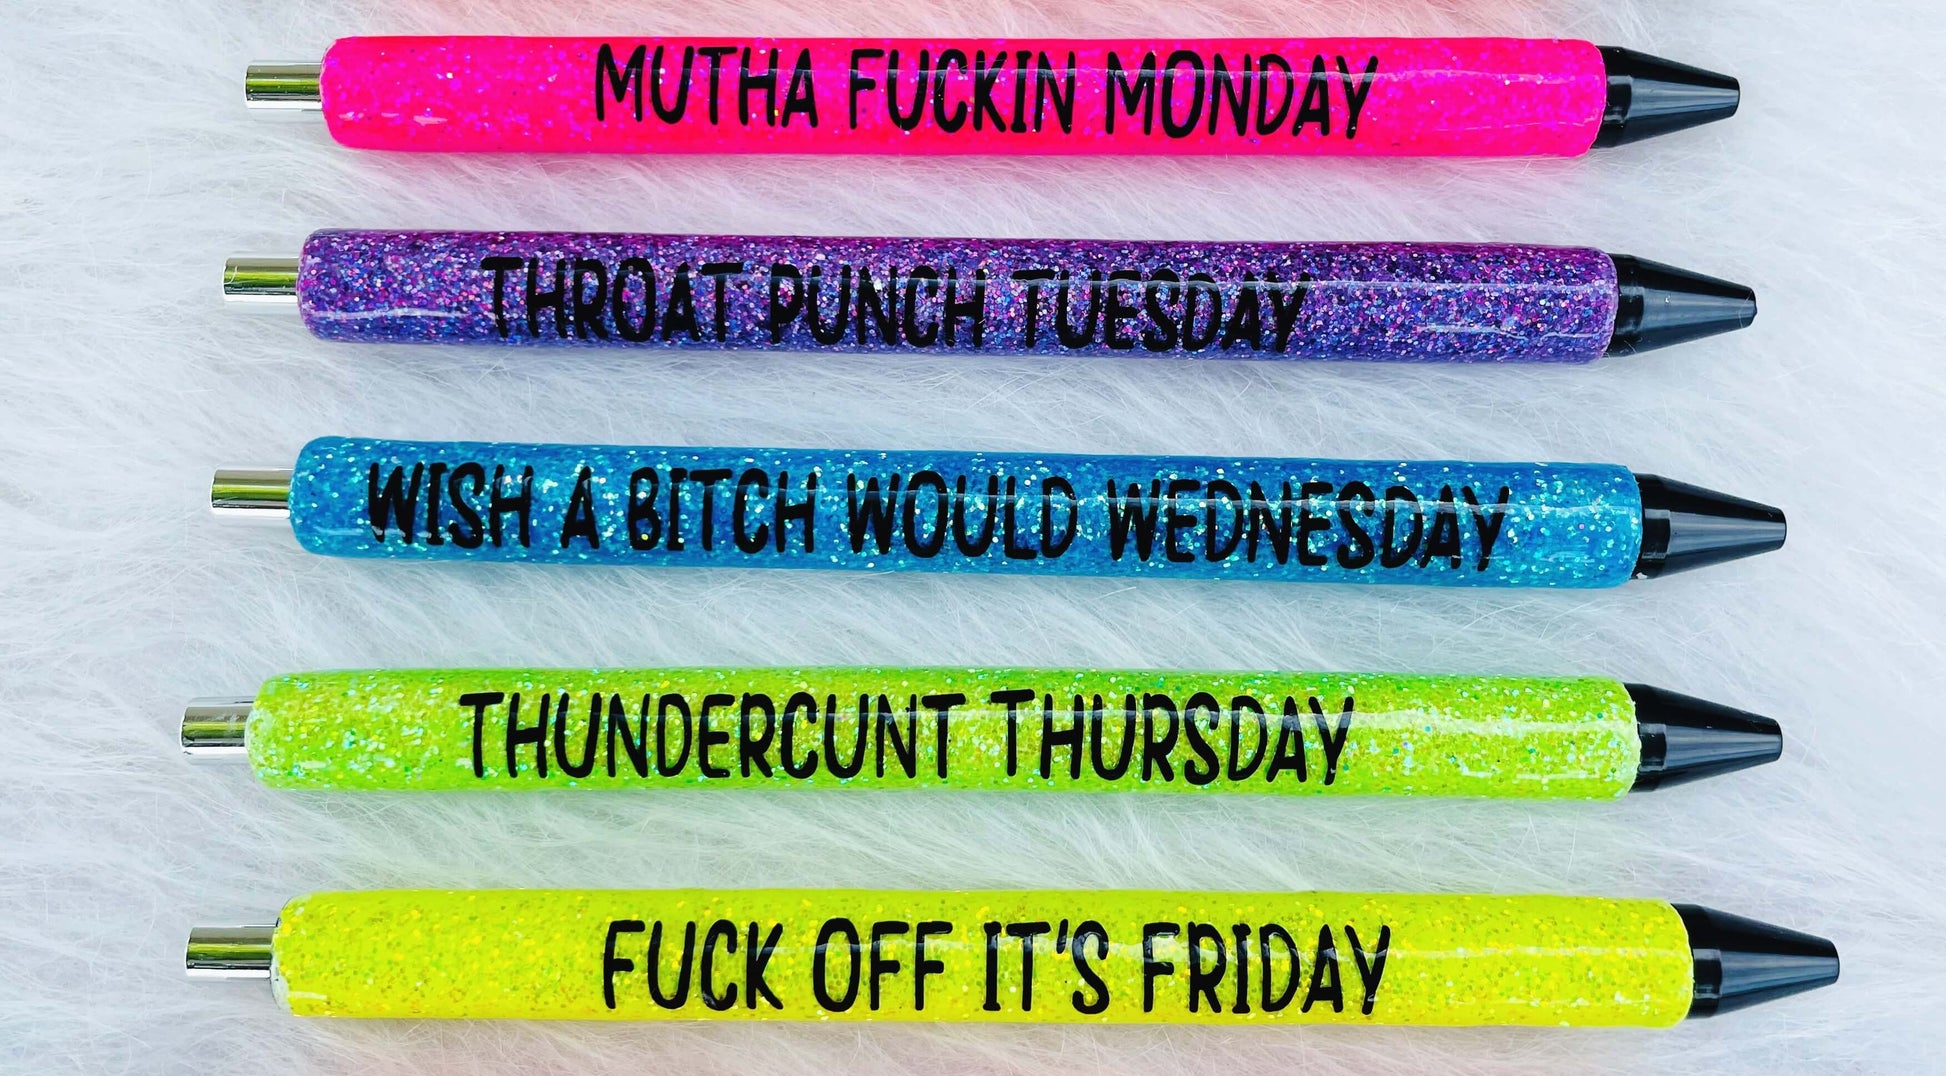 Day of the Week Pens 